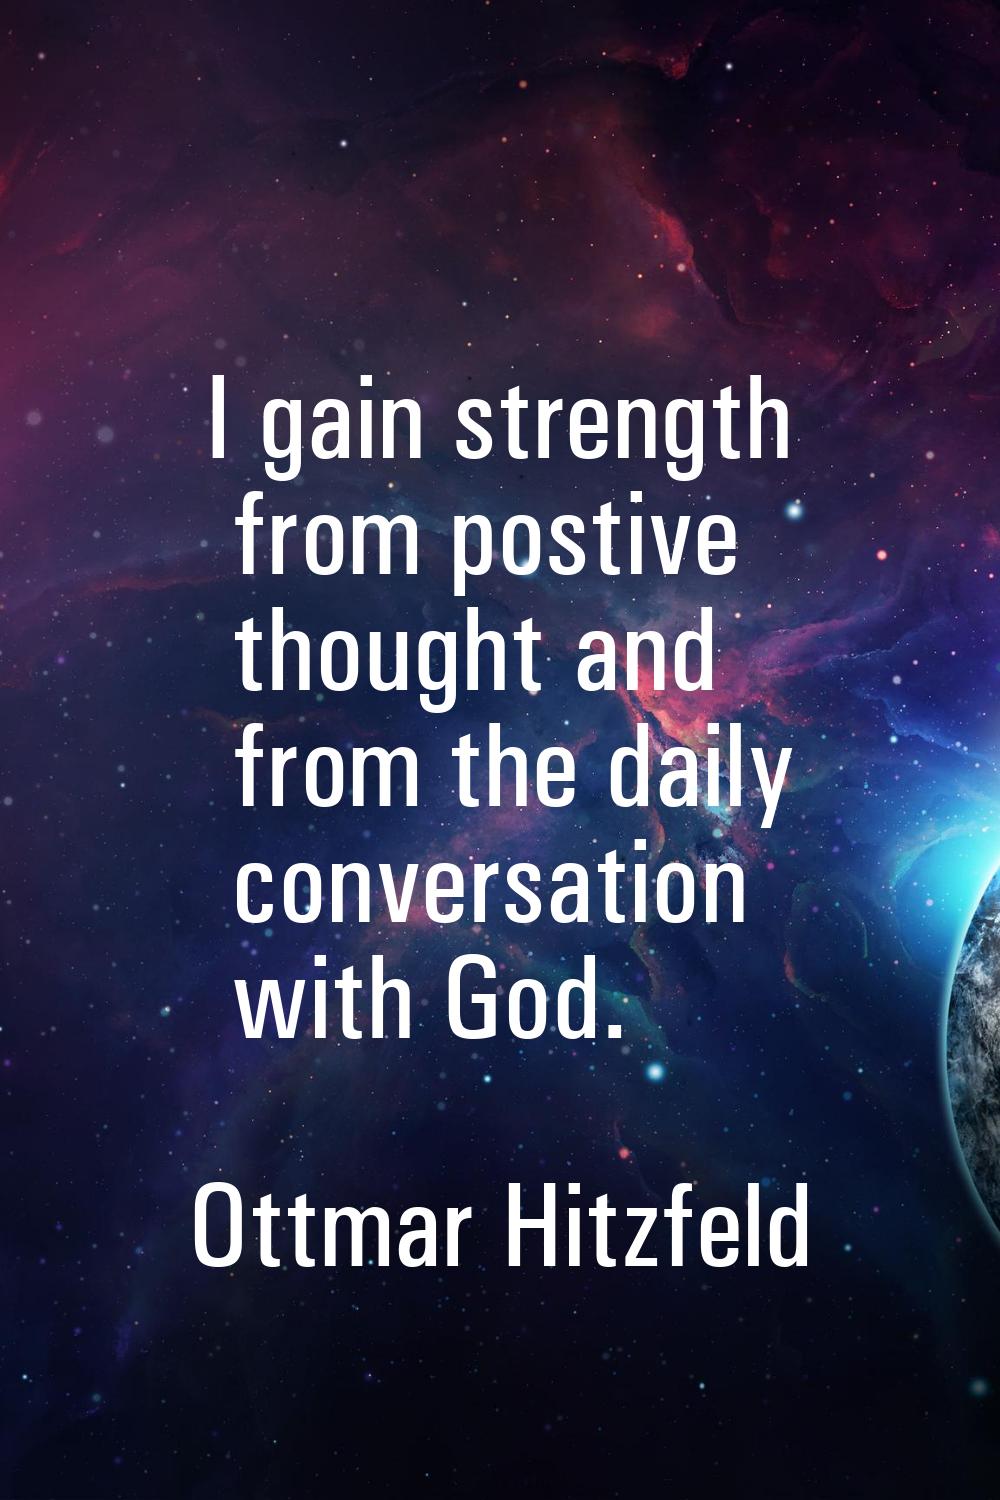 I gain strength from postive thought and from the daily conversation with God.